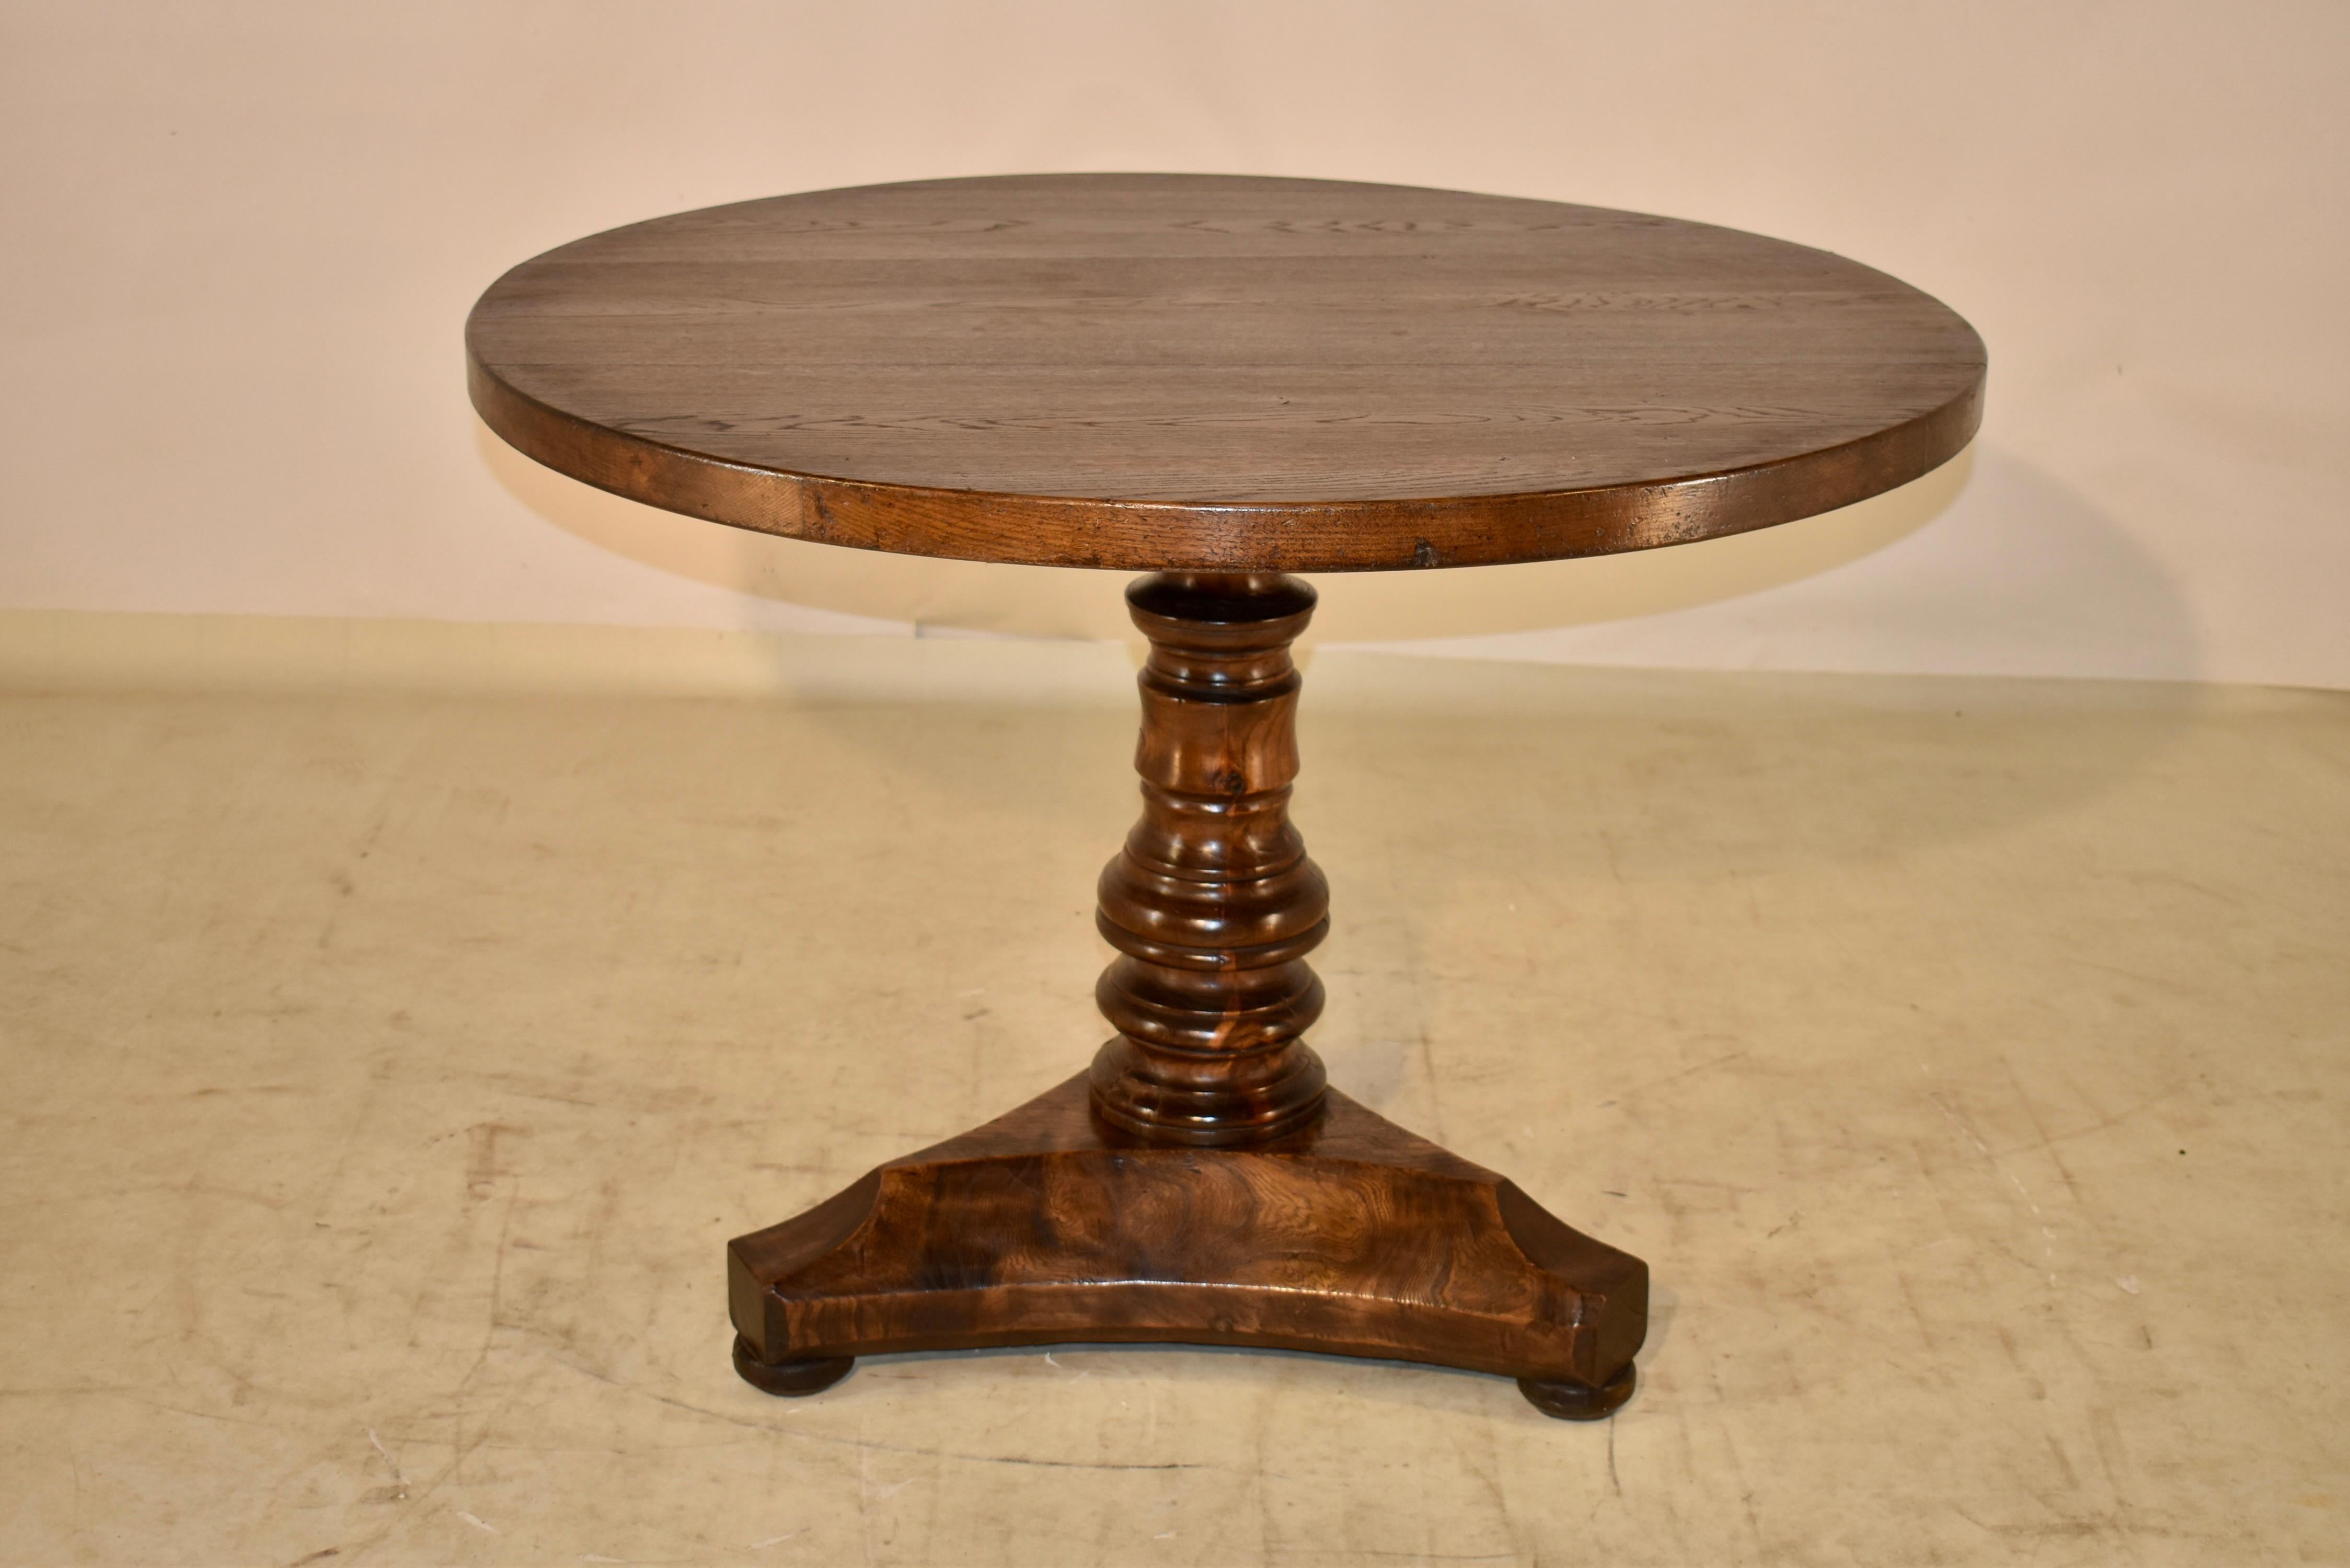 19th century oak and elm table from France. The top is 1.75 inches thick and is made from oak planks. It is supported on a hand turned pedestal. The pedestal and tripod shaped base are hand carved from elm and has wonderful graining and color. The